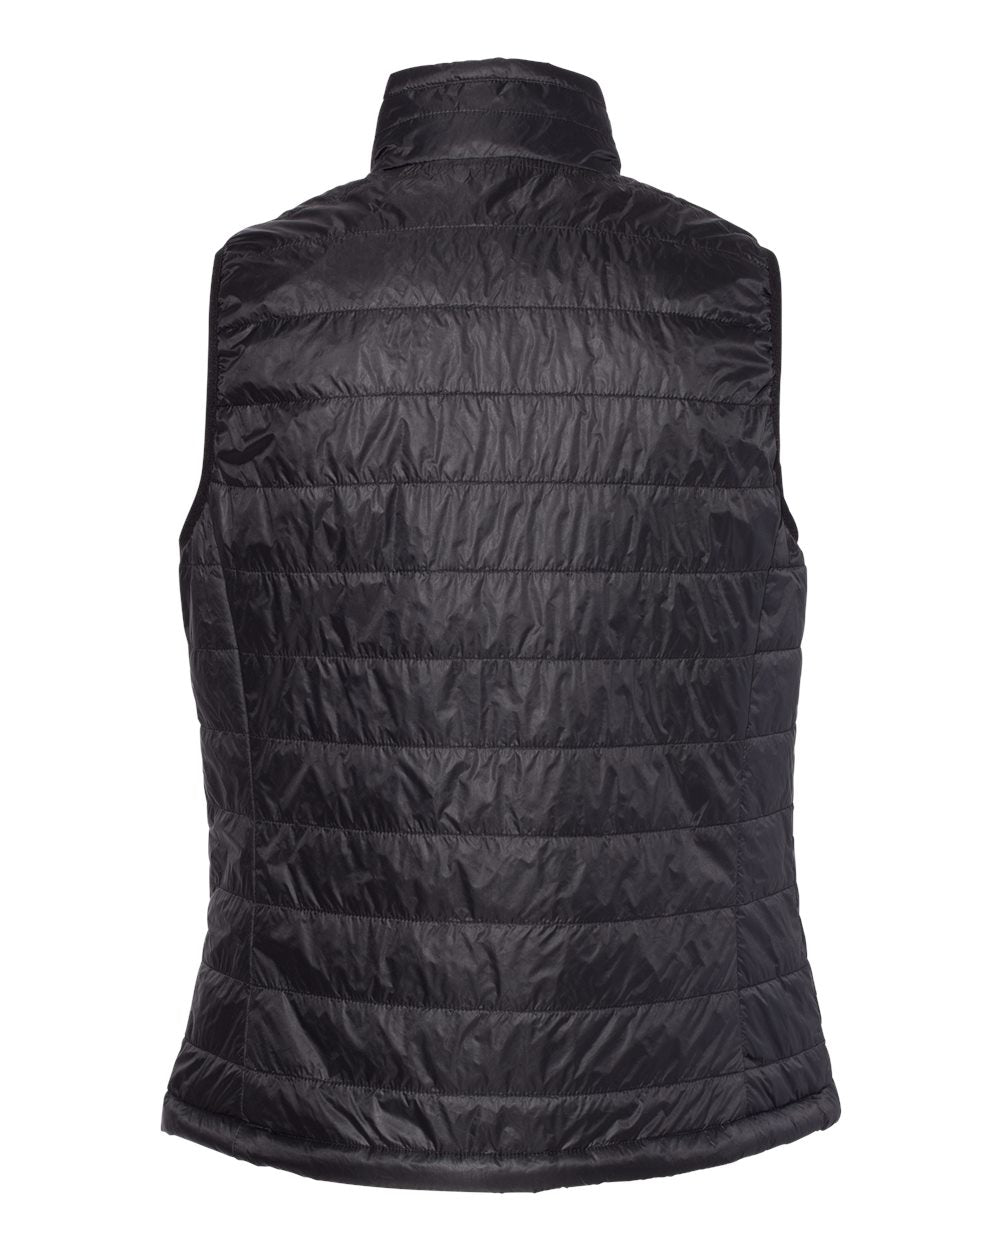 Independent Trading Co. Women's Puffer Vest EXP220PFV #color_Black